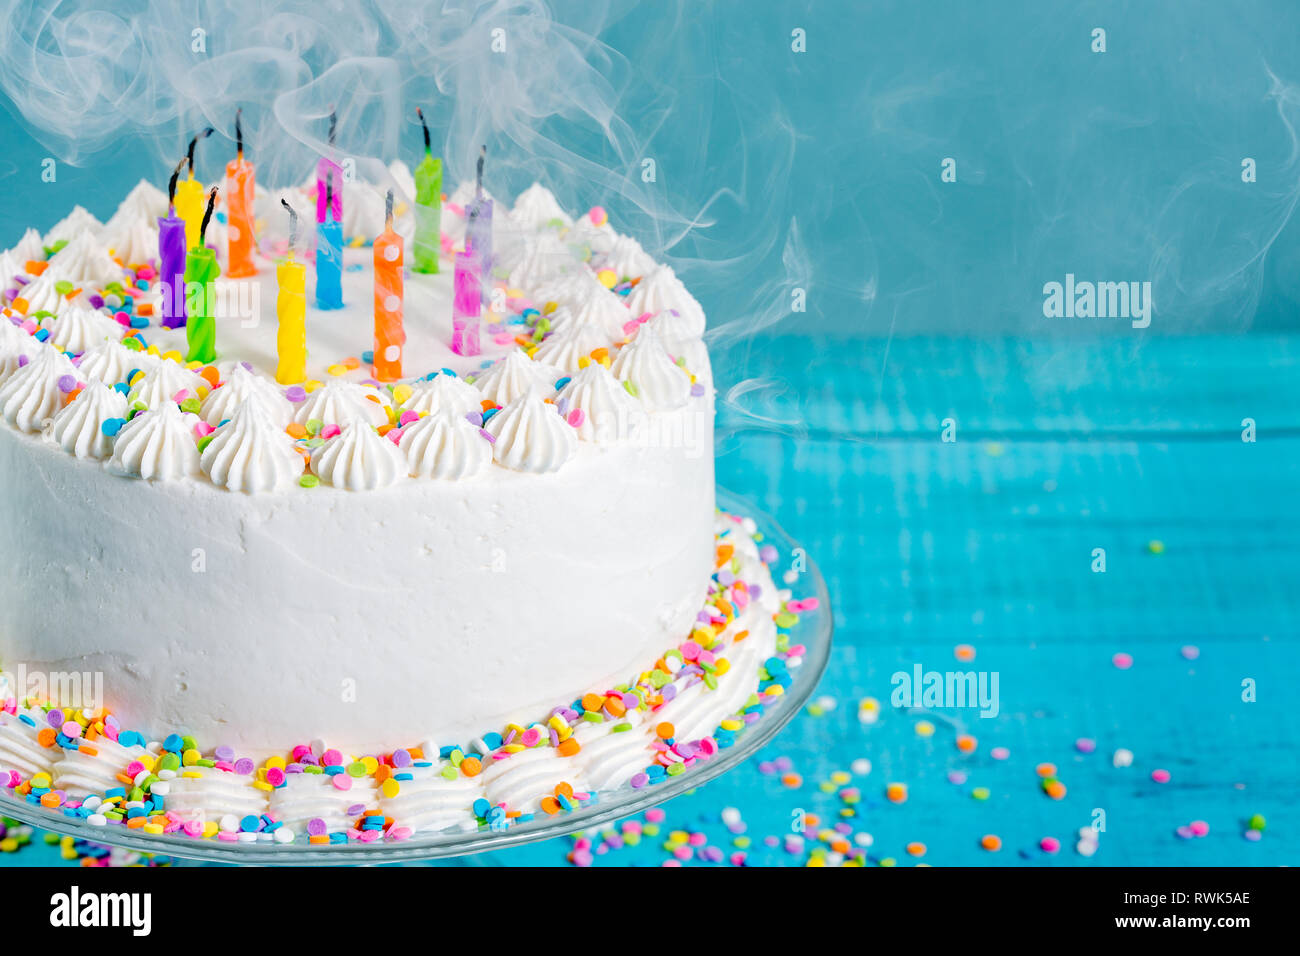 White Buttercream icing birthday cake with blown out Candles over blue background Stock Photo